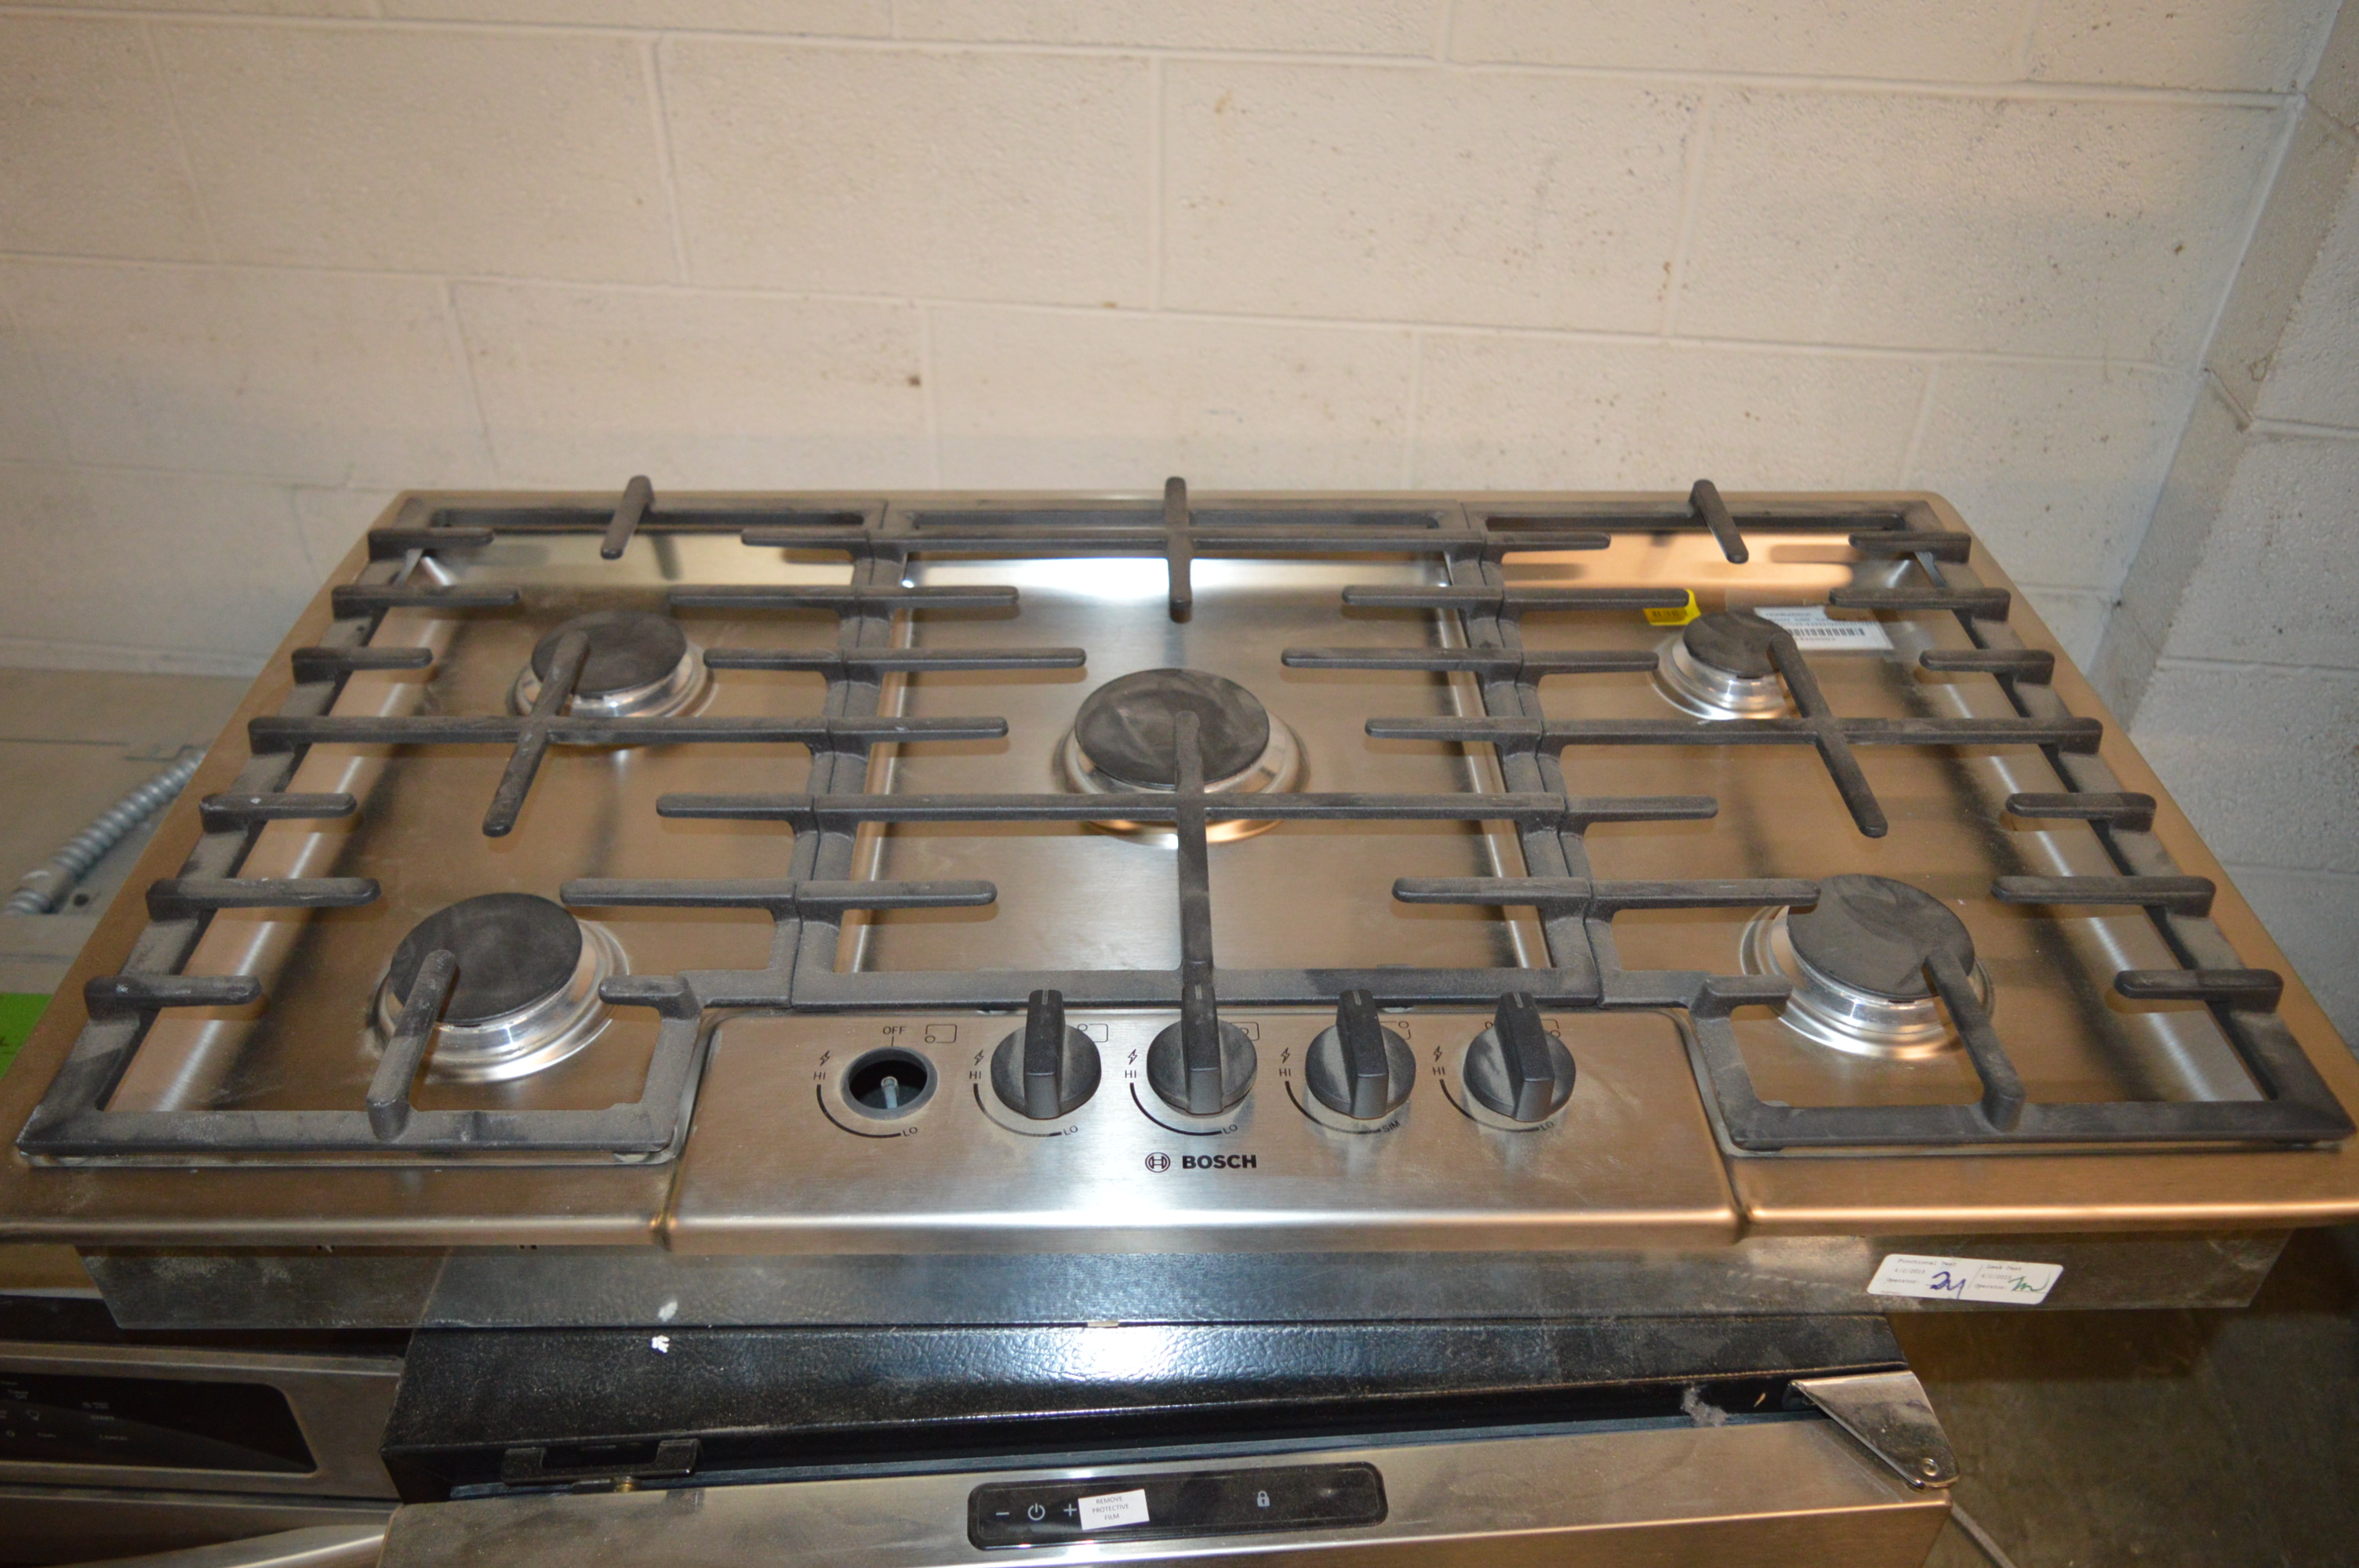 Bosch Ngm5655uc 36 Stainless Gas Cooktop W 5 Sealed Burners